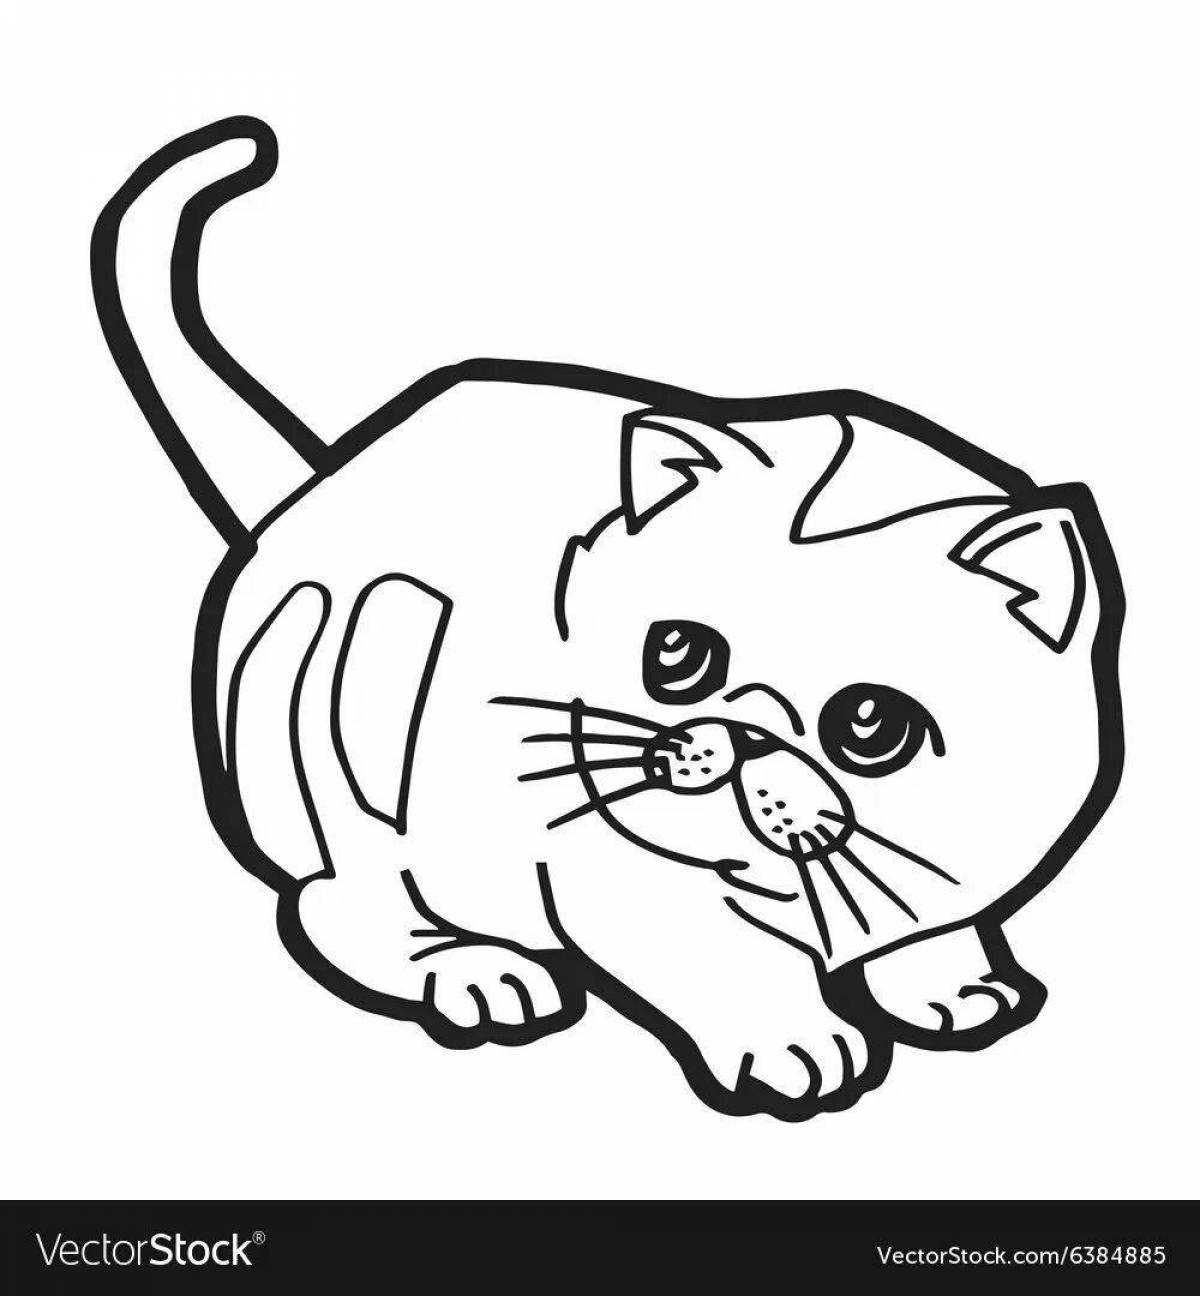 Coloring page adorable scottish fold kittens